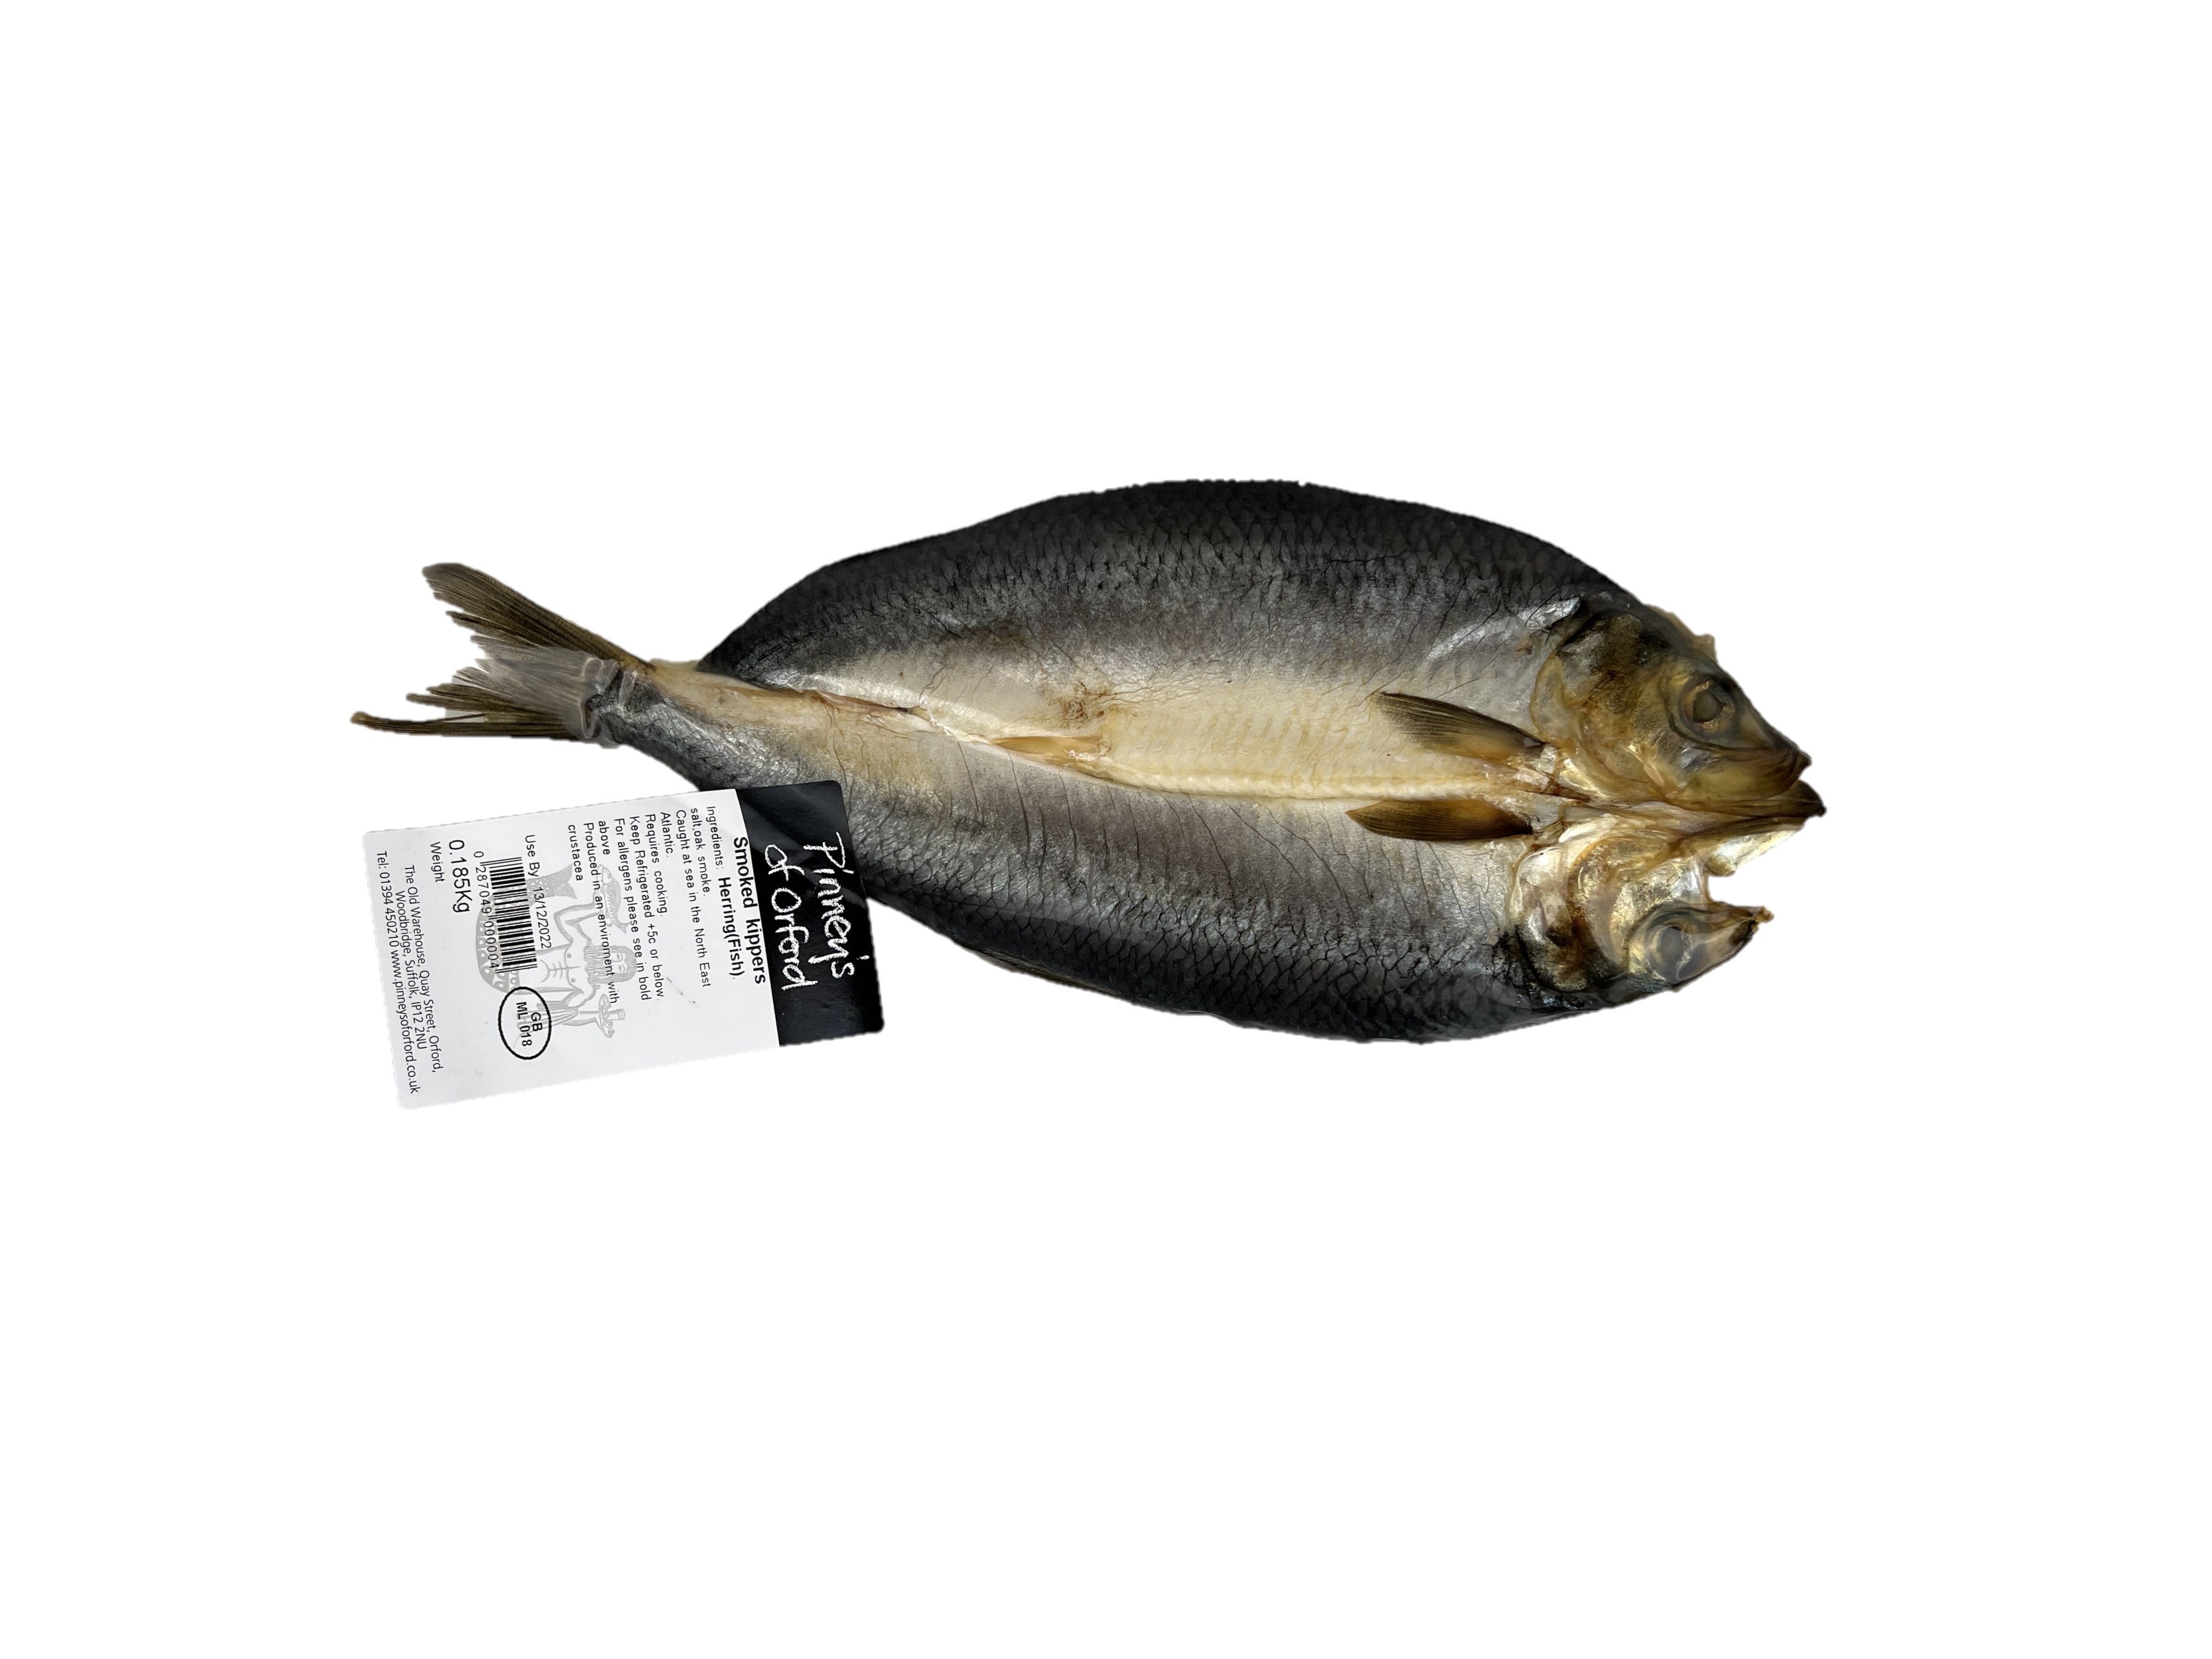 Smoked Kippers - Pinney's of Oxford approx 185g – Notting Hill Fish + Meat